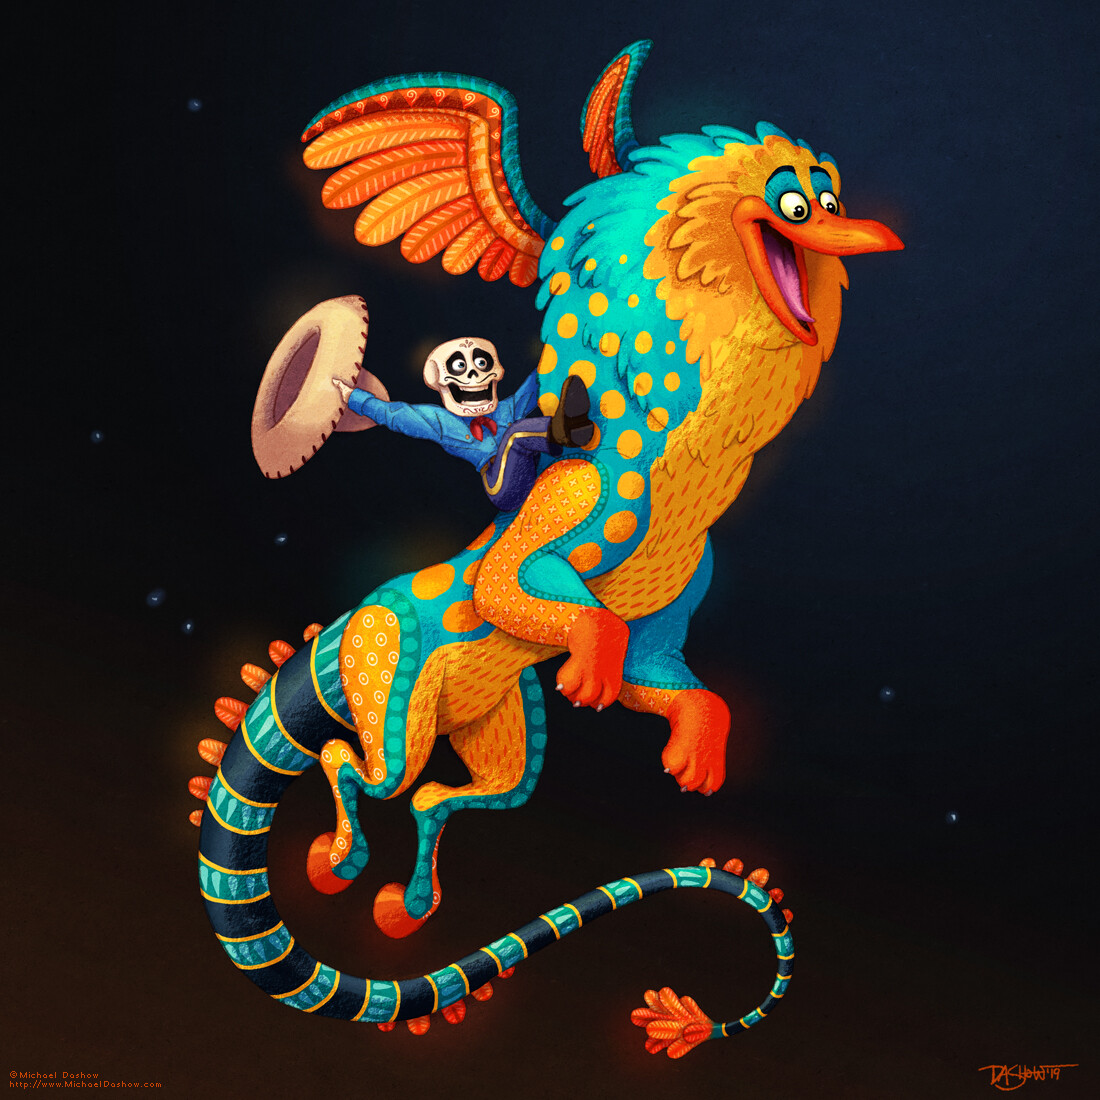 in a Character Design Challenge with the theme of alebrijes, the Mexican sp...